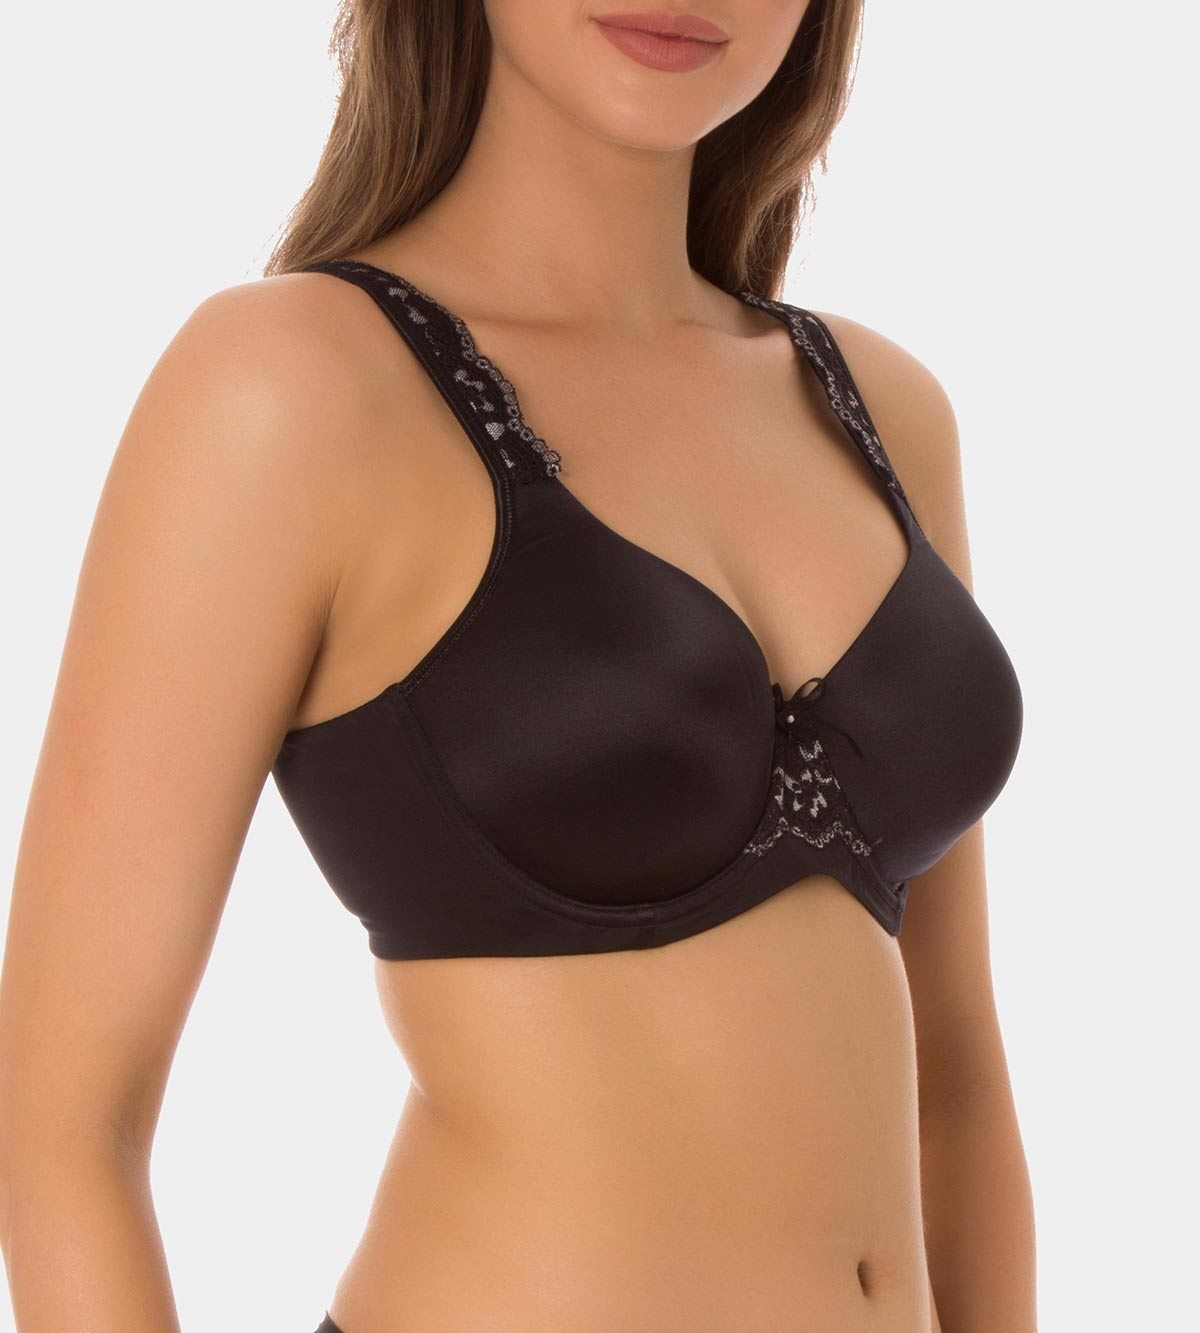 Triumph Gorgeous Silhouette - Underwire Bra  Available at Illusions Lingerie